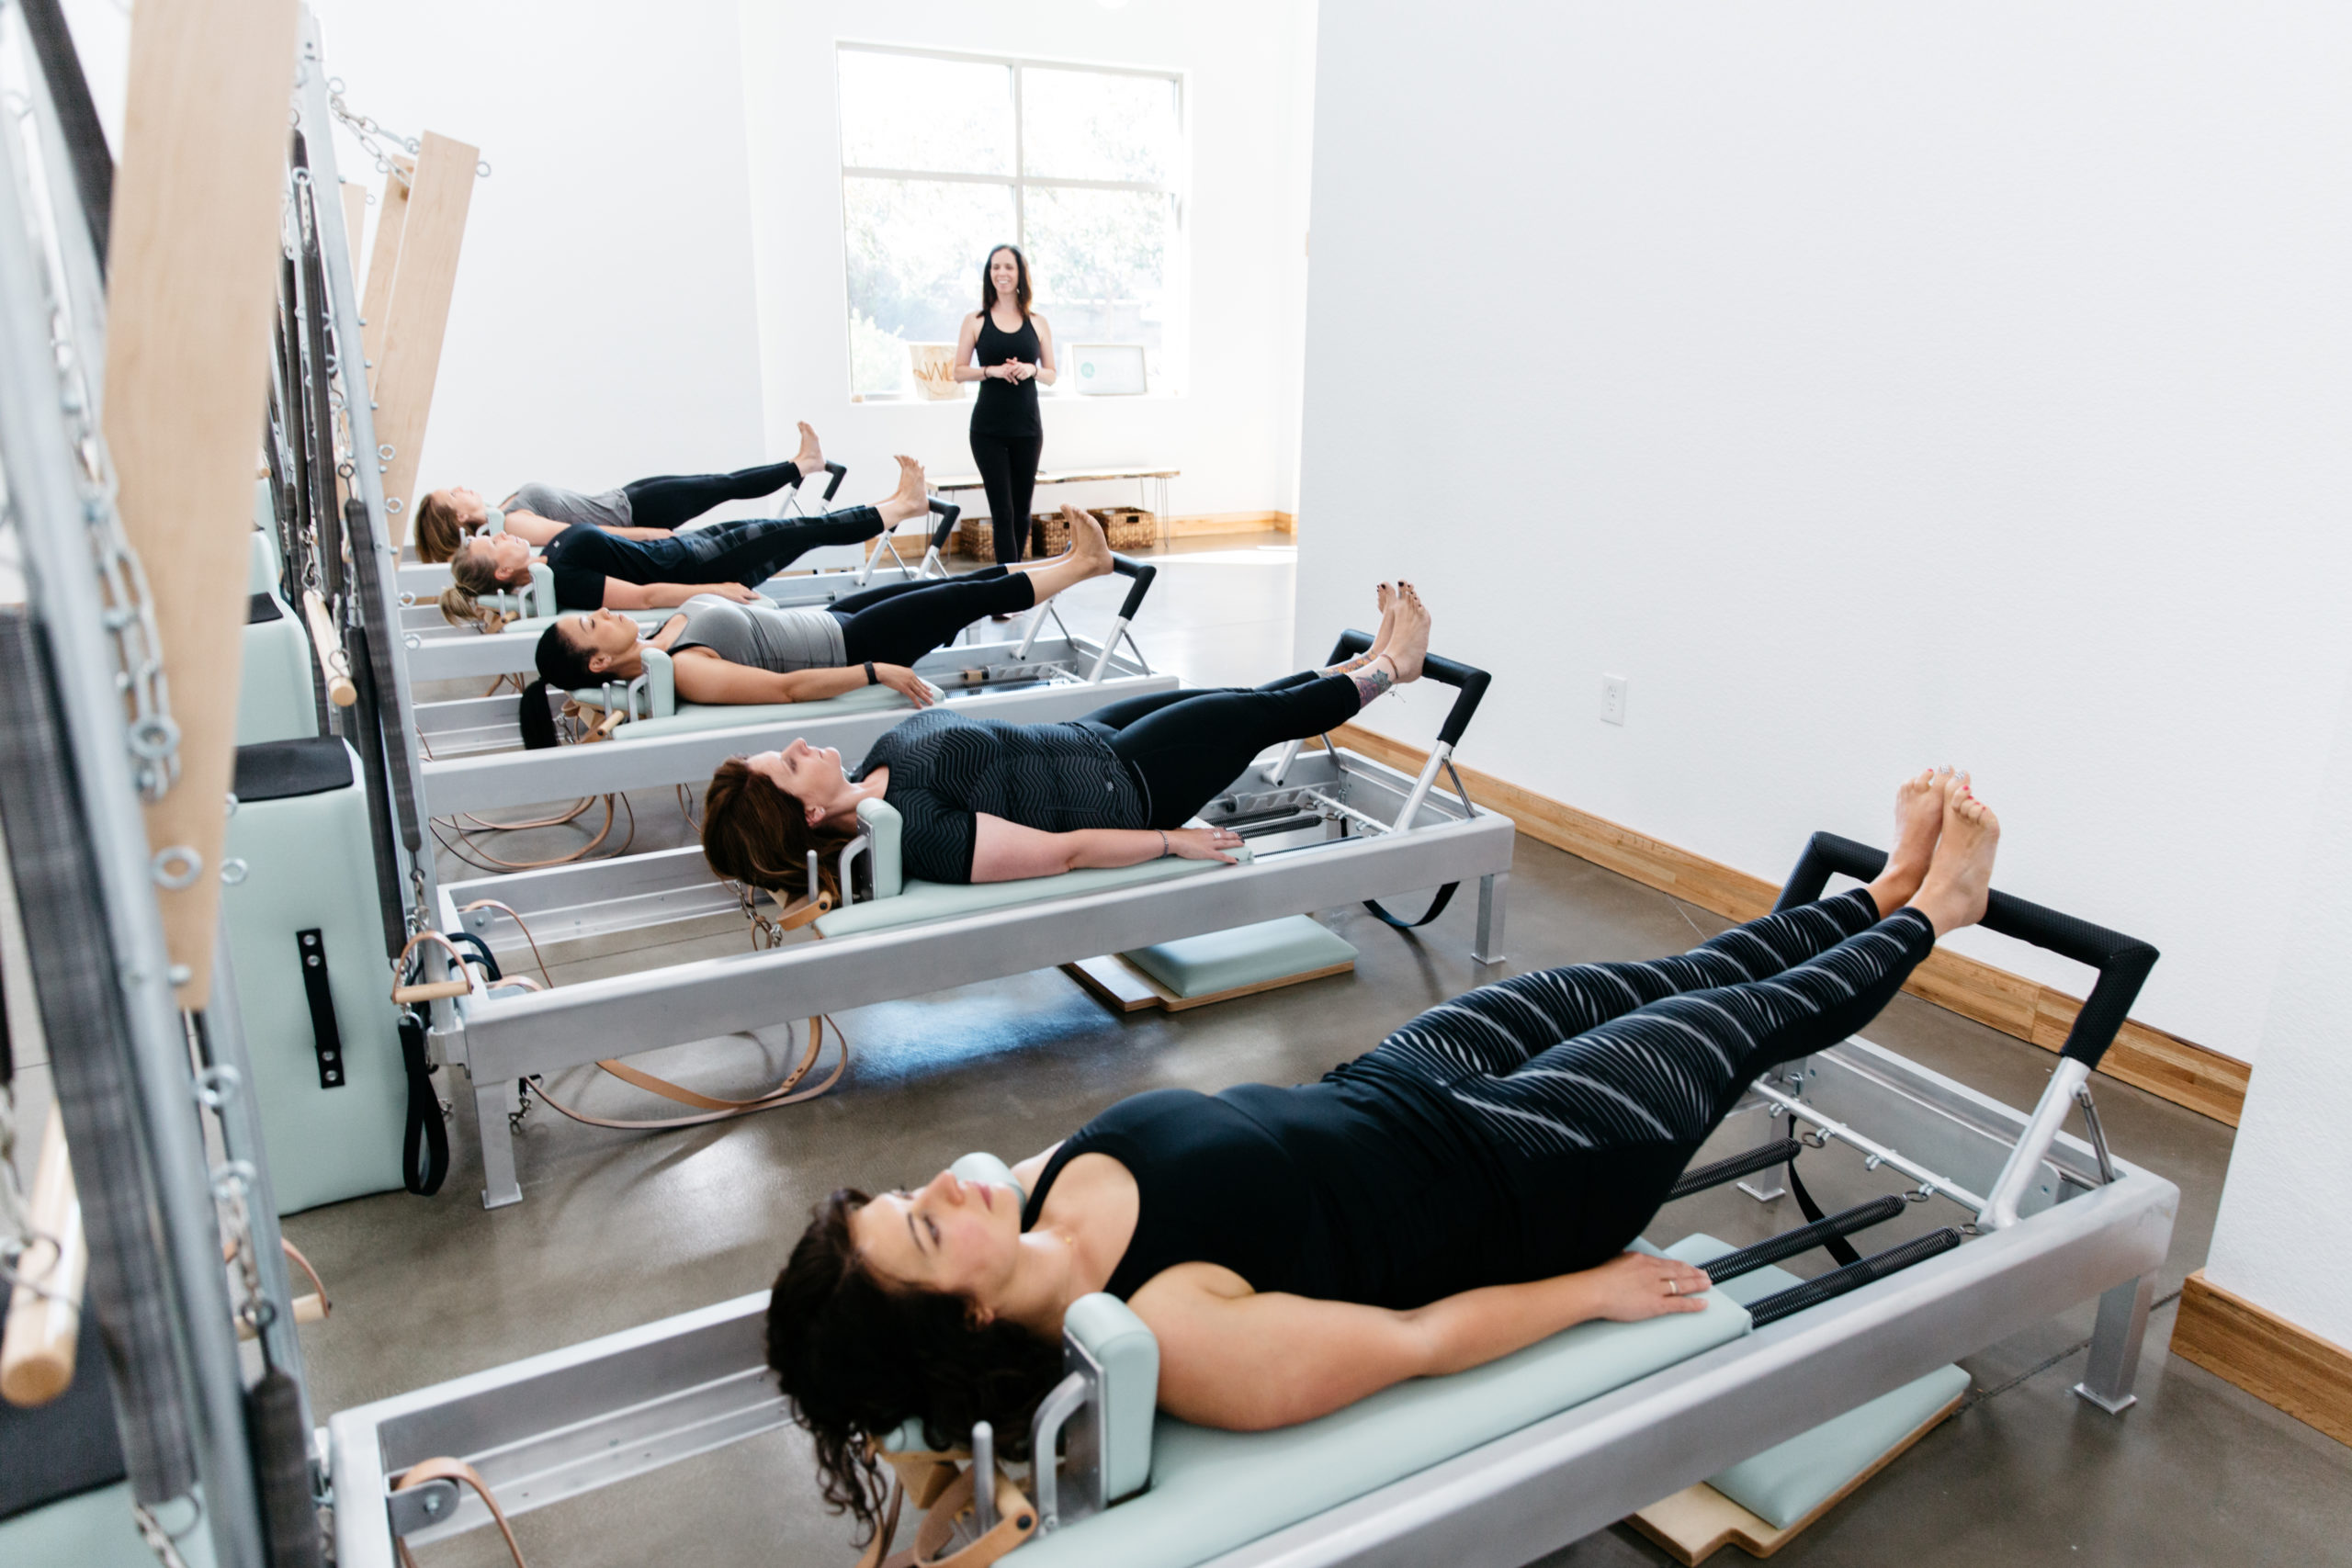 Alive Pilates - The importance of the core muscles